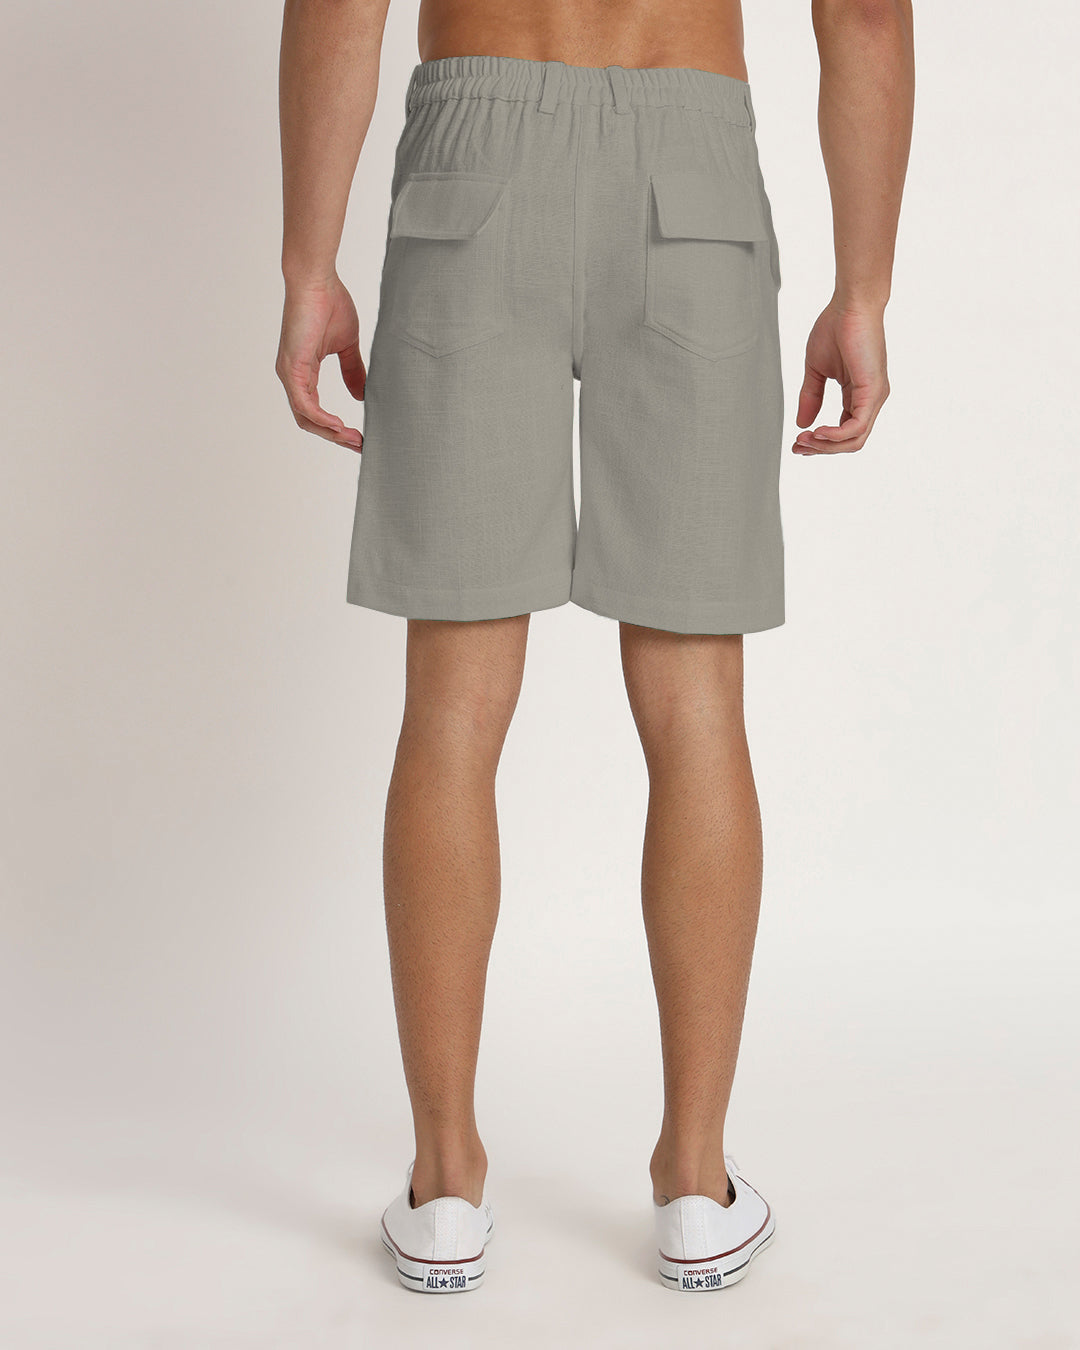 Patch Pocket Playtime Iced Grey Men's Shorts